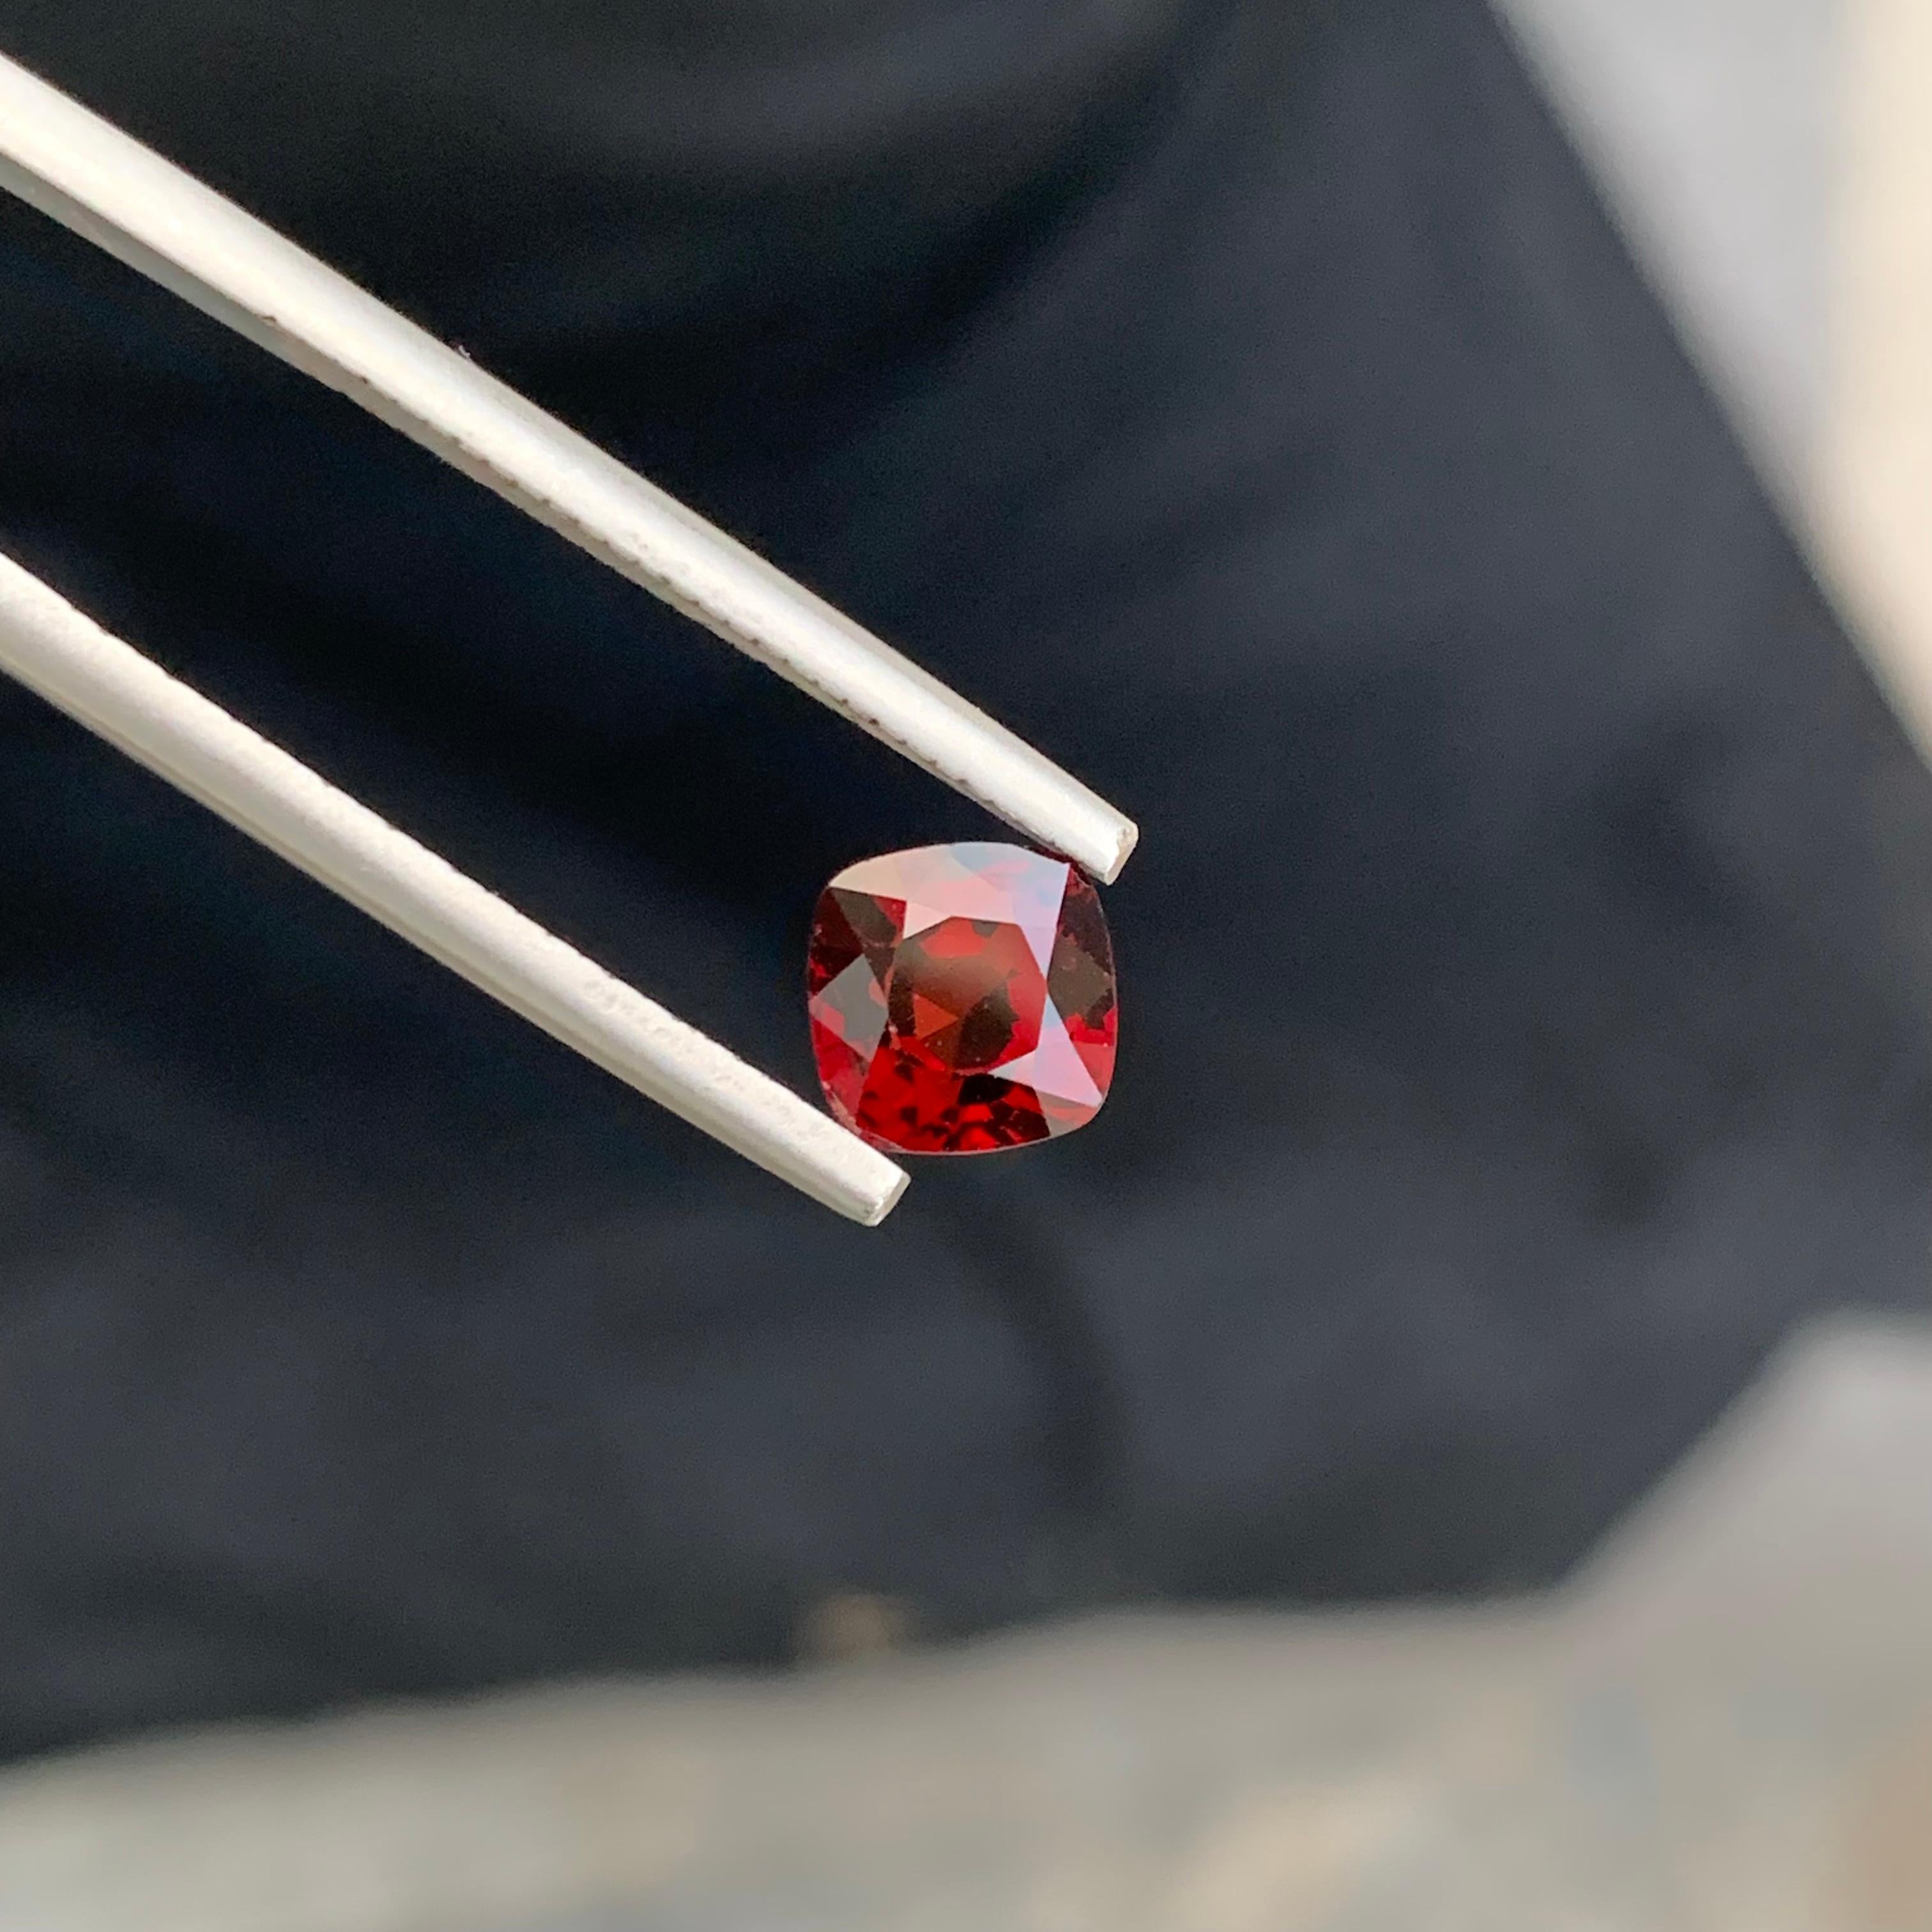 Loose Spinel
Weight: 1.60 Carats 
Dimension: 6.3x6.2x4.5 Mm
Origin: Burma / Myanmar
Treatment: Non
Color: Red
Shape: Cushion 
certificate: on demand
Red spinel is a mesmerizing gemstone known for its rich and vivid crimson hues, often mistaken for